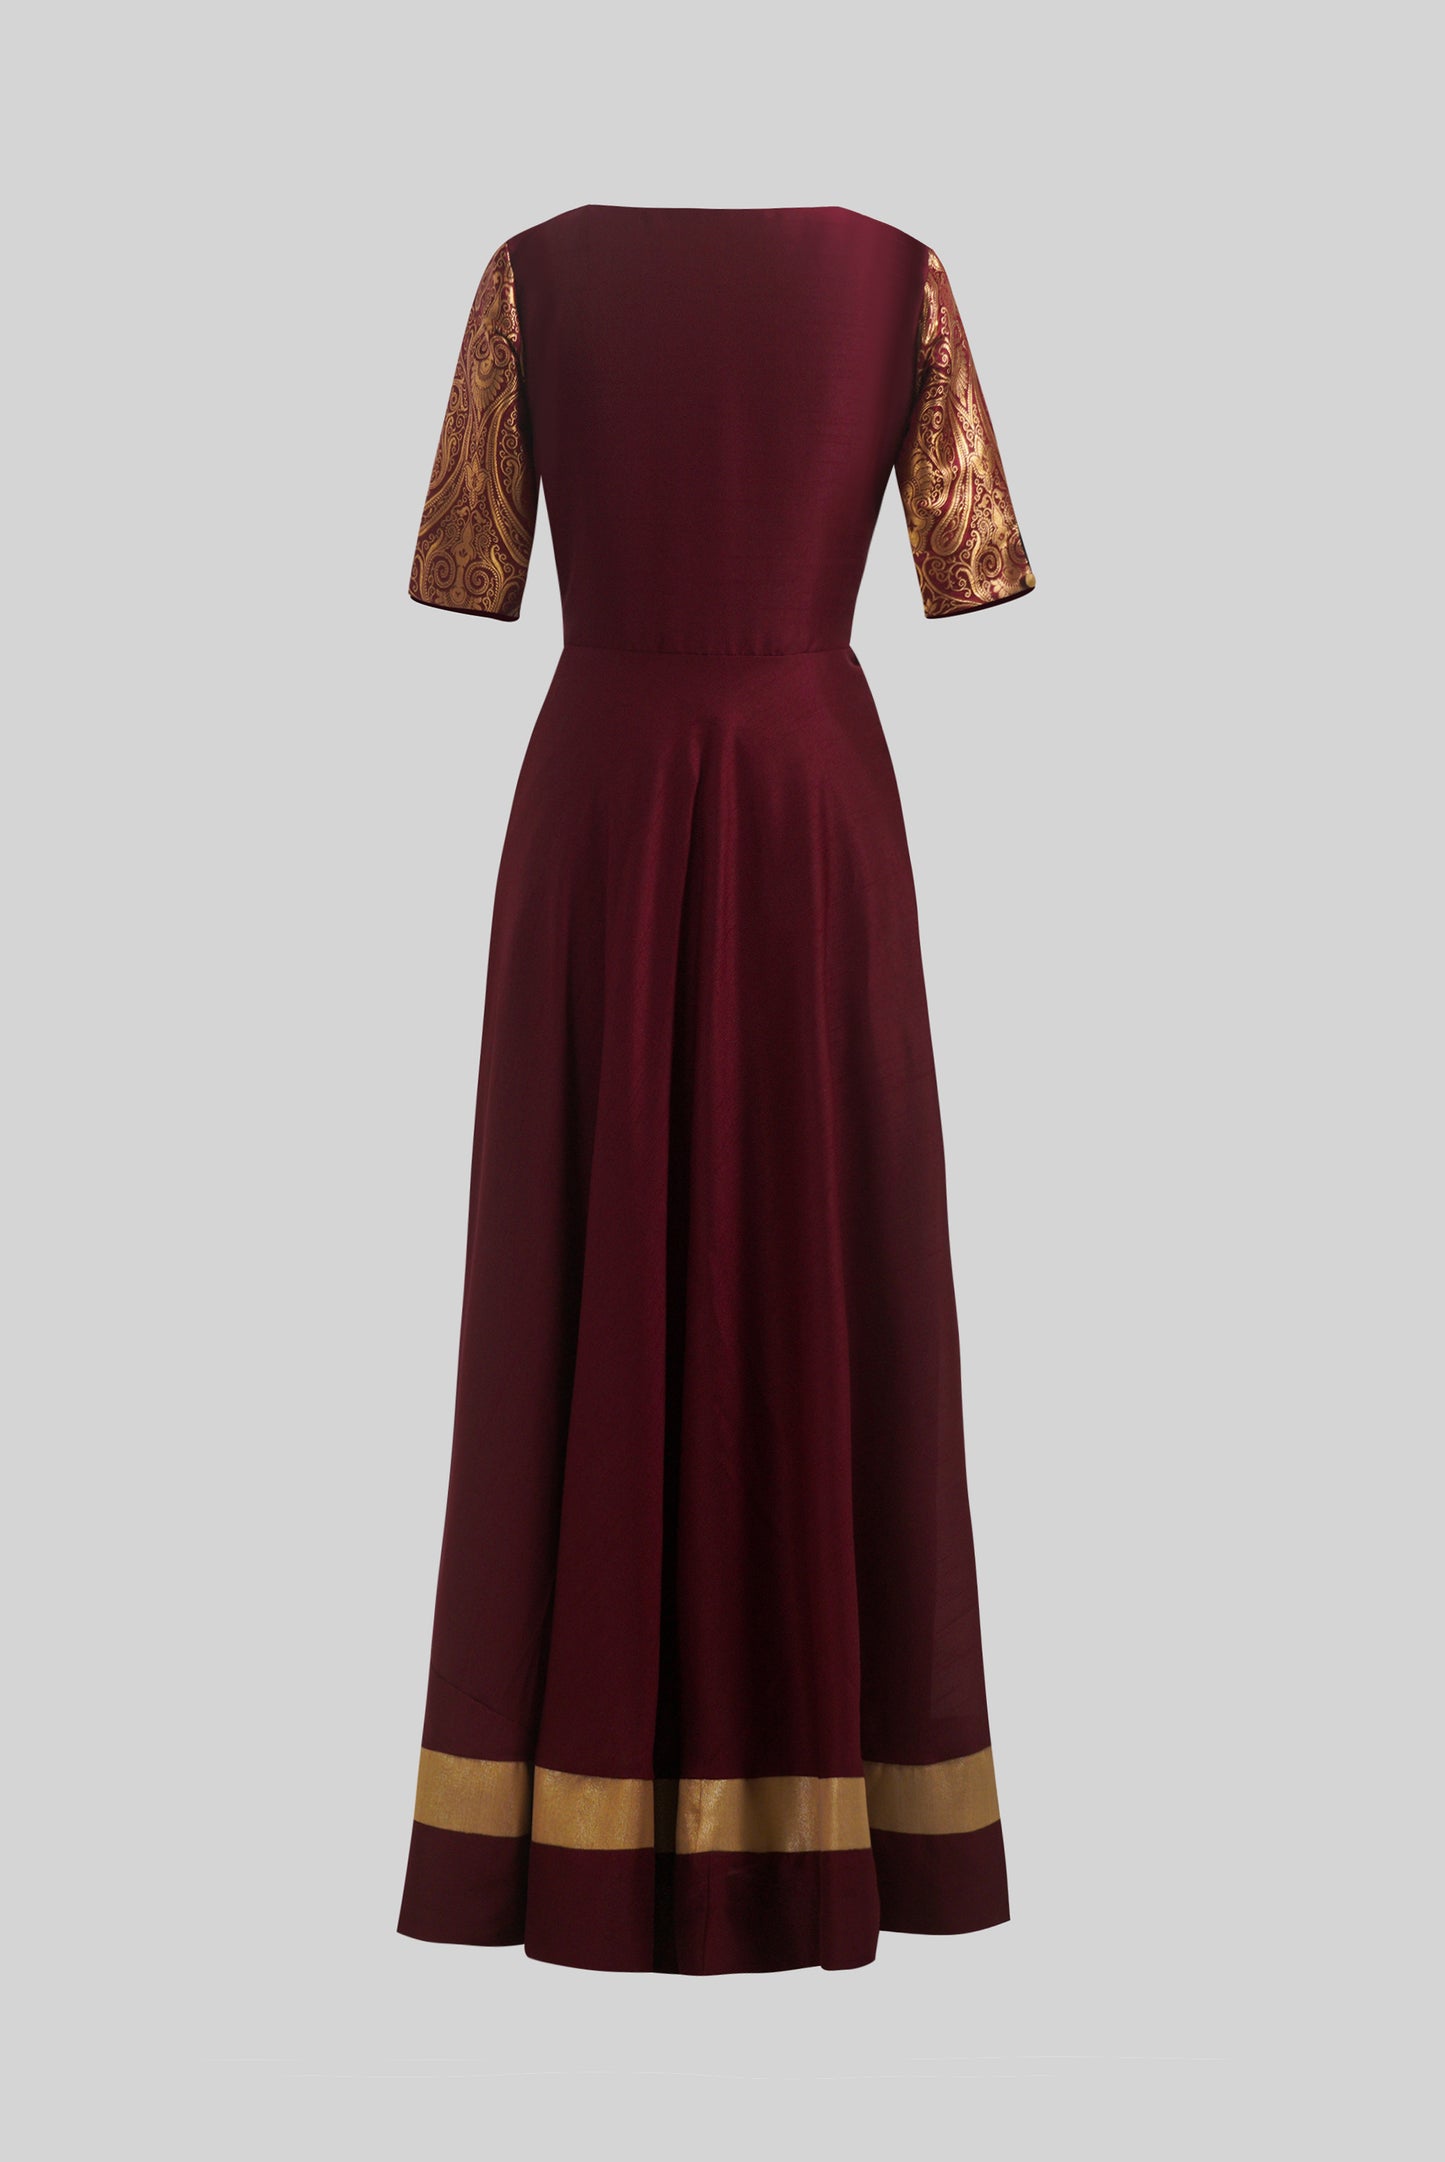 ZIA248 Maroon Brocade Full Length Gown with Boat Neck